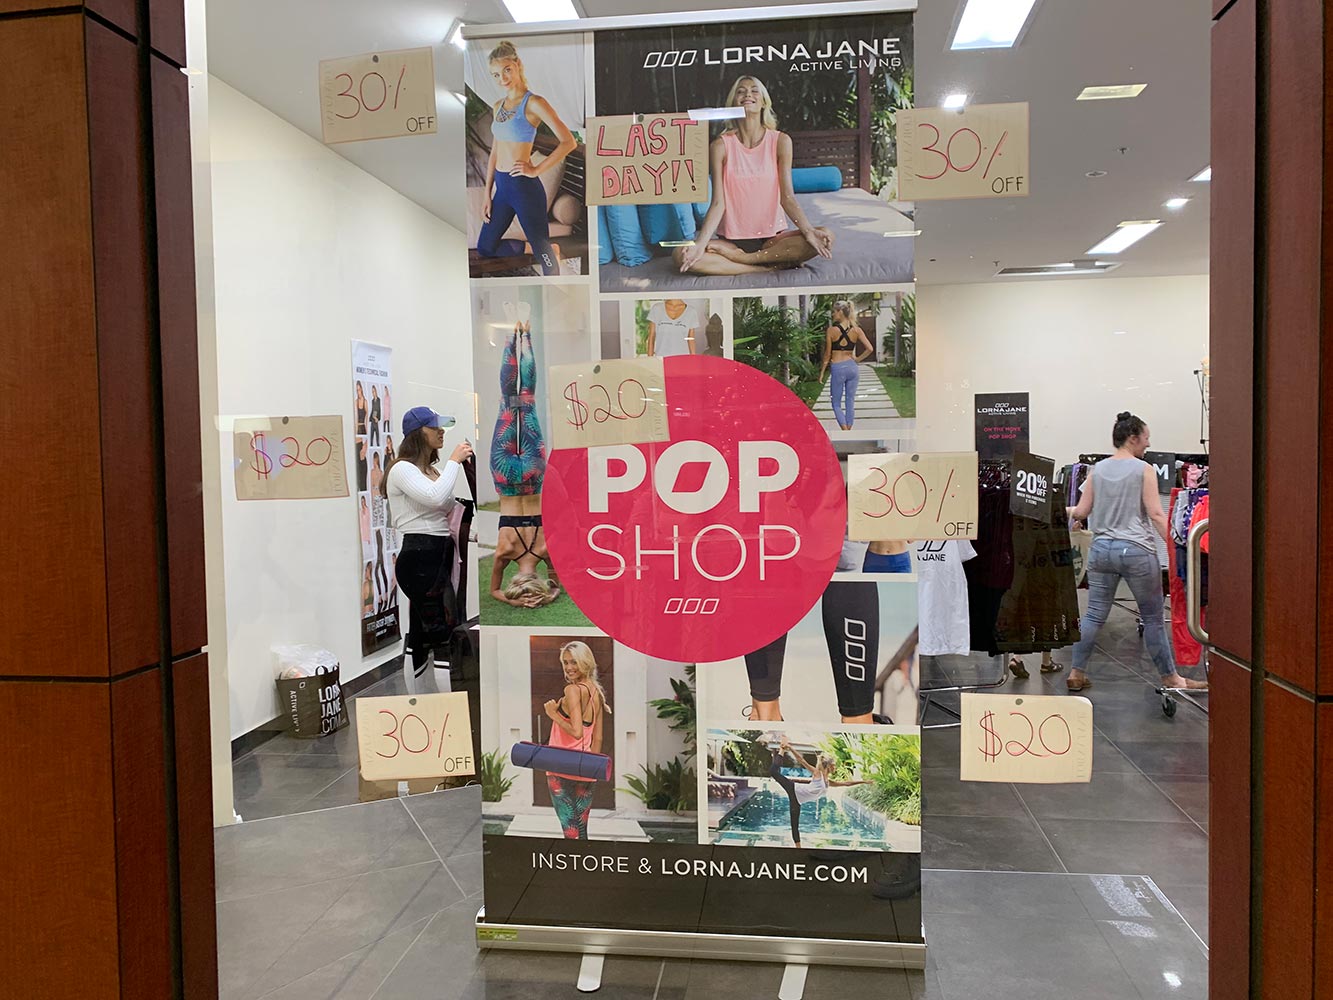 Lorna Jane Active Living franchisee plans more stores in Hawaii after  opening first store at Ala Moana Center - Pacific Business News